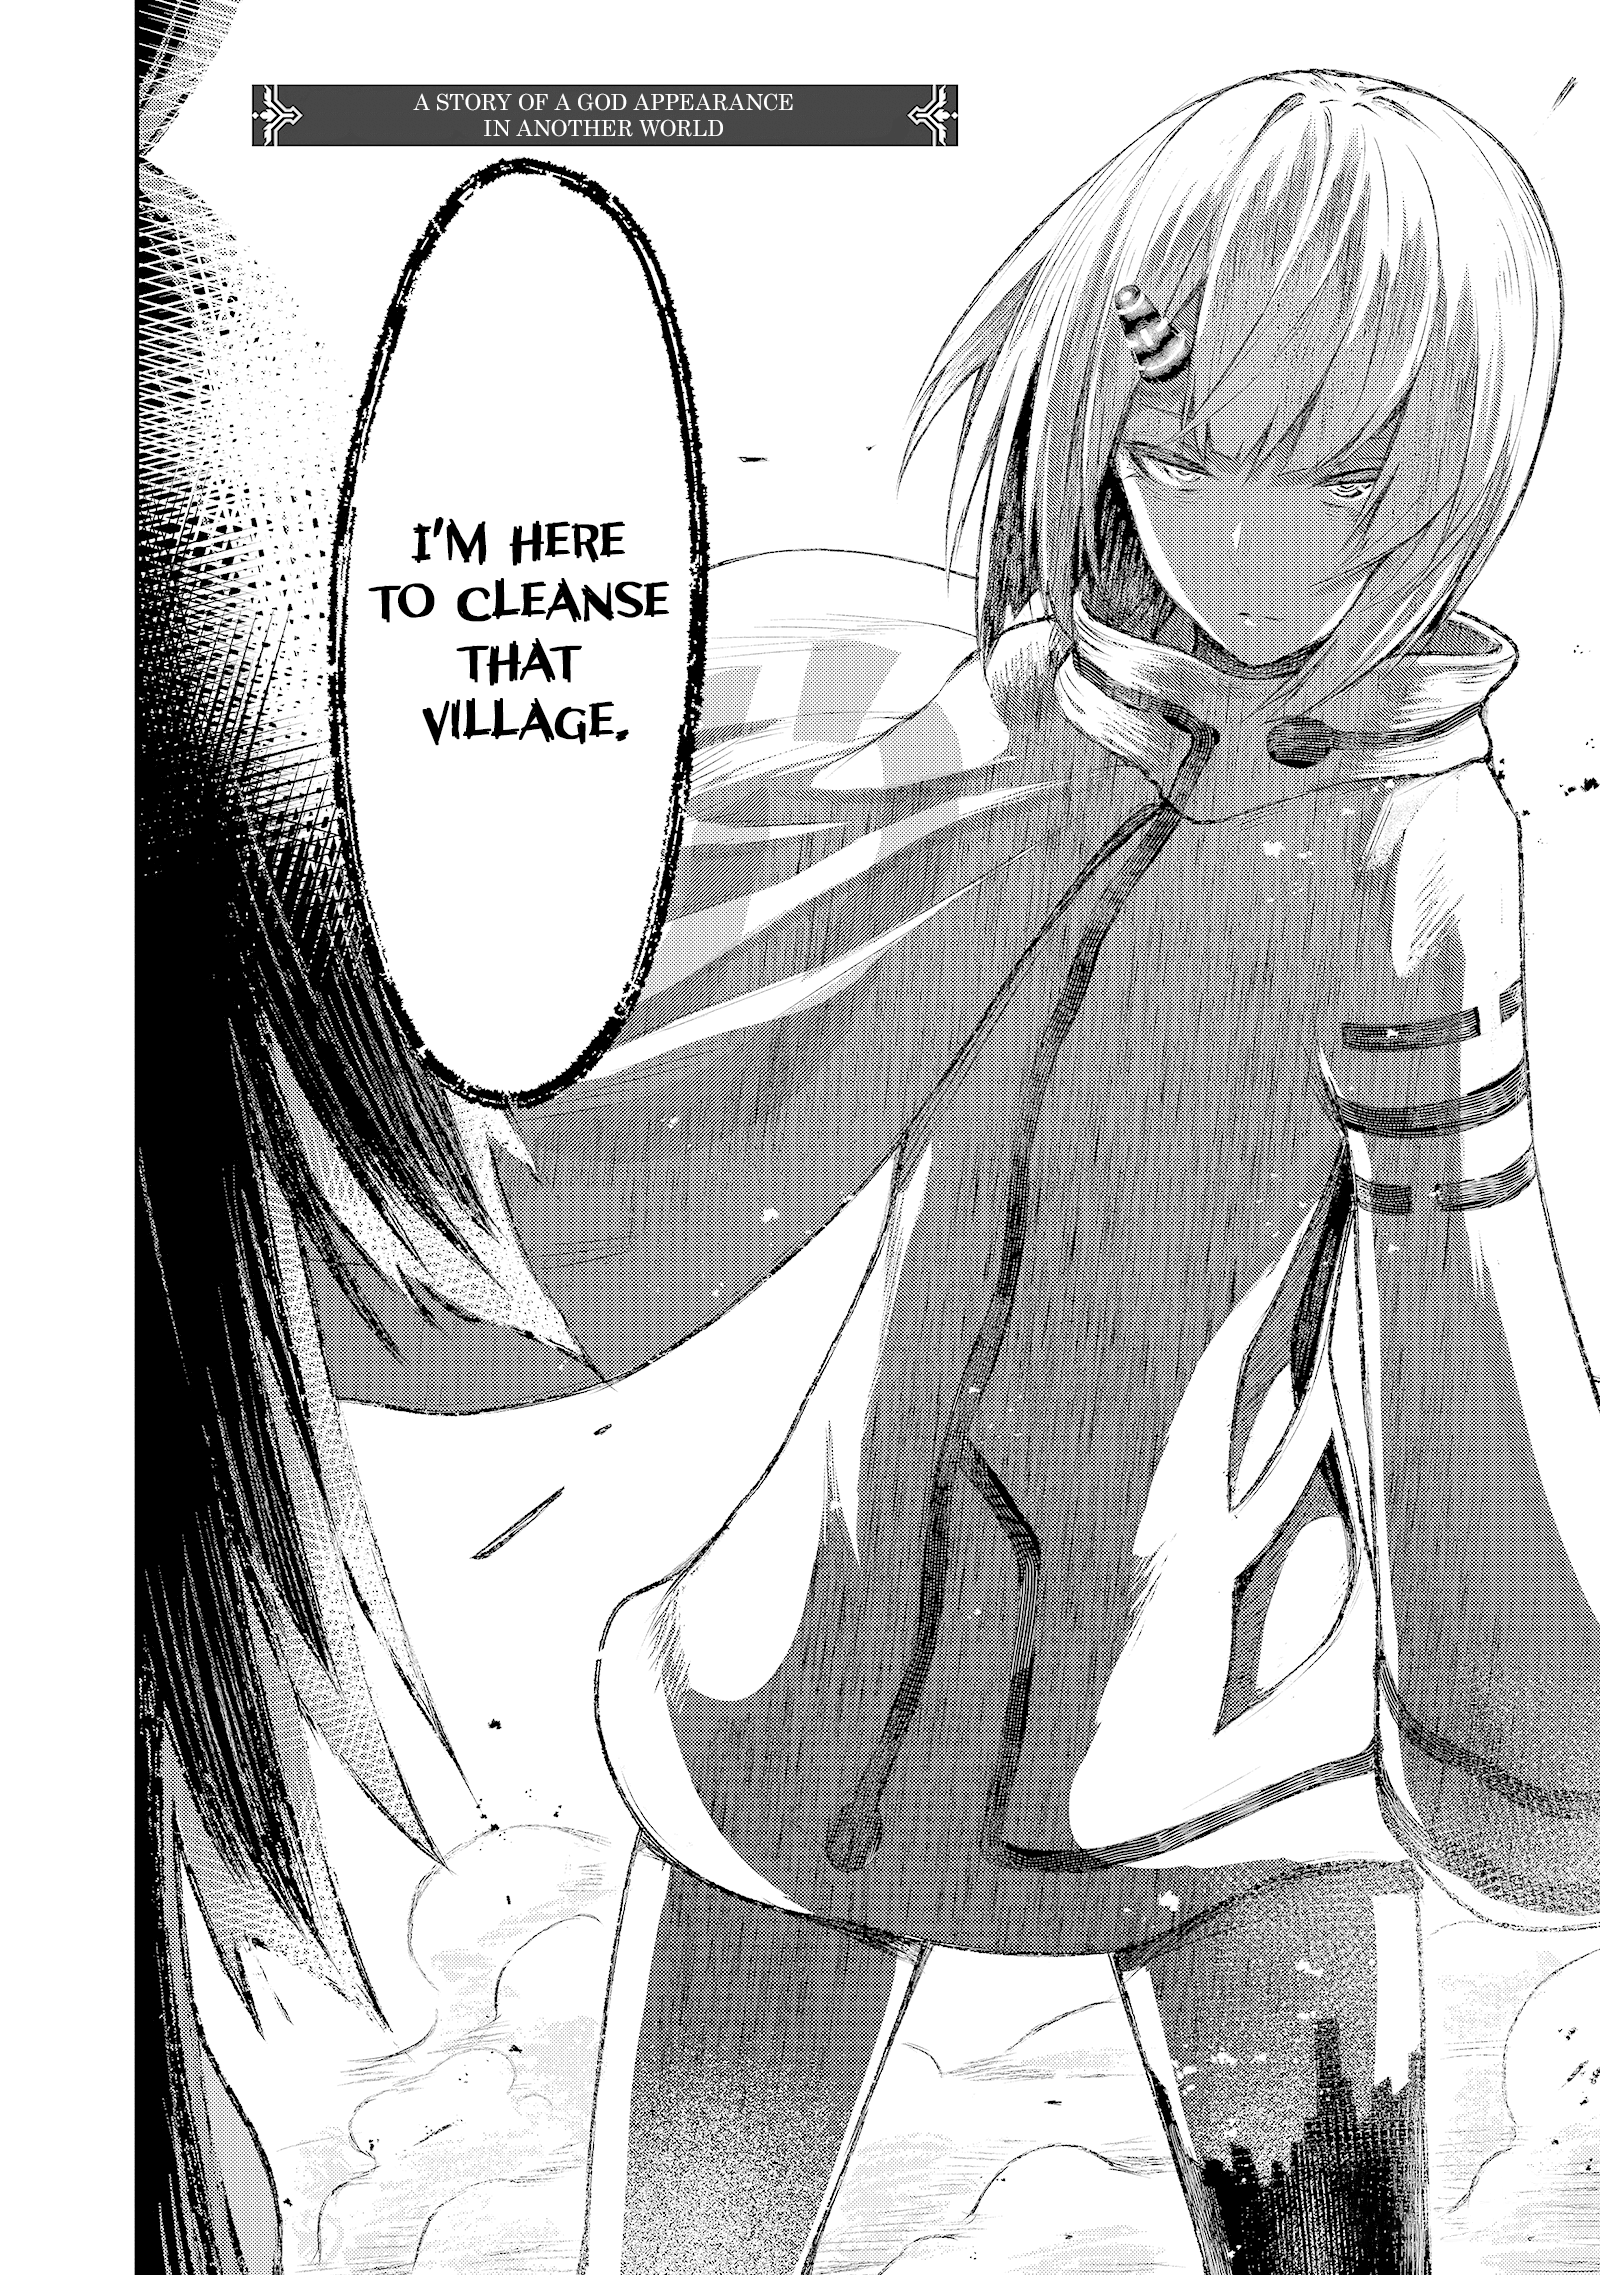 Kaminaki Sekai No Kamisama Katsudou Vol.2 Chapter 7: A Story Of A God Appearance In Another World - Picture 2